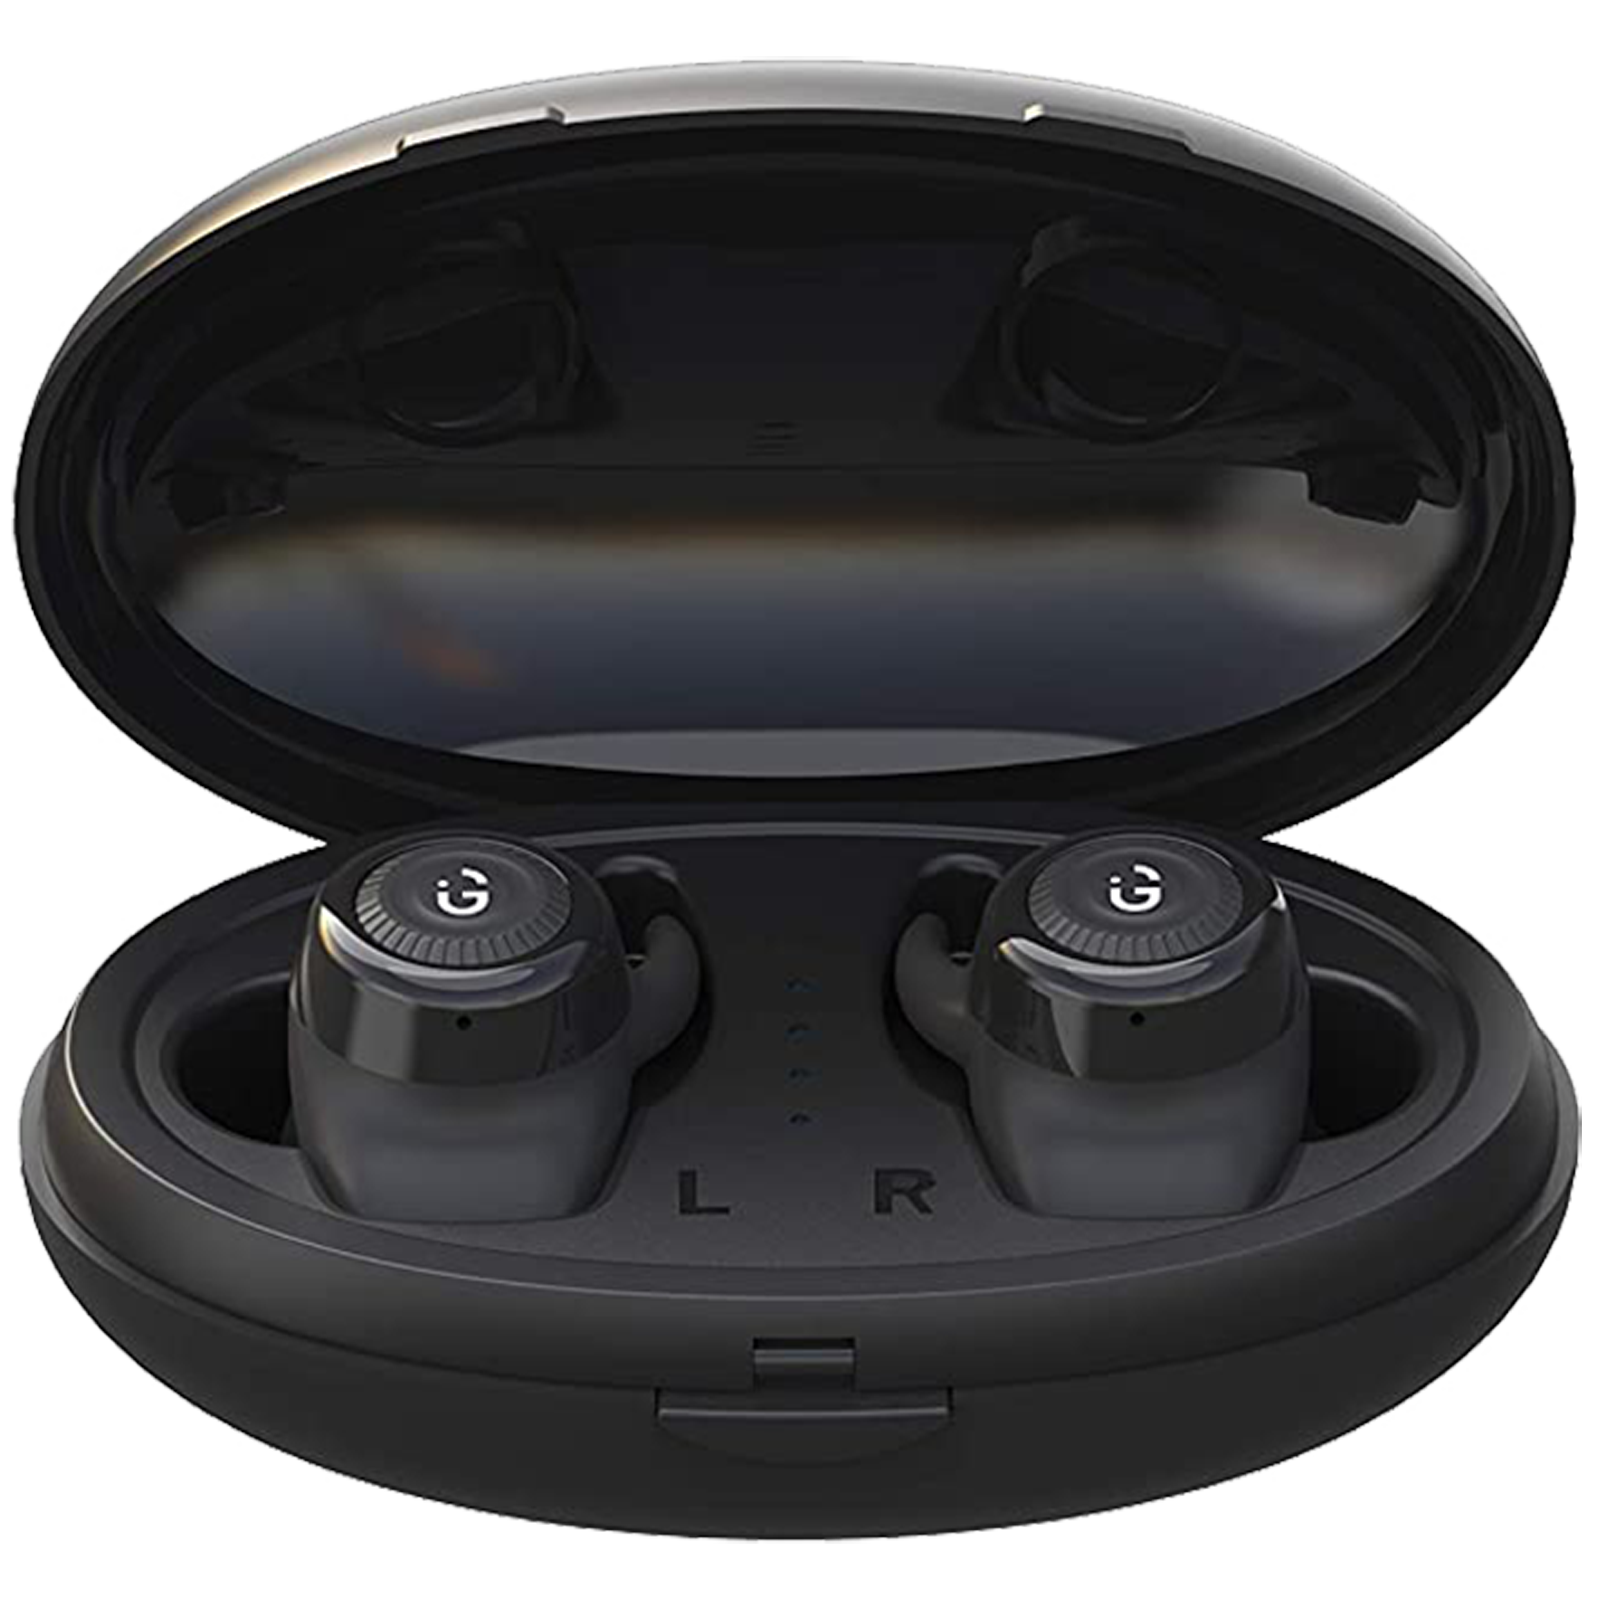 IGear - iGear Bumble Bee In-Ear Truly Wireless Earbuds with Mic (Bluetooth 5.0, iG-1142, Black)